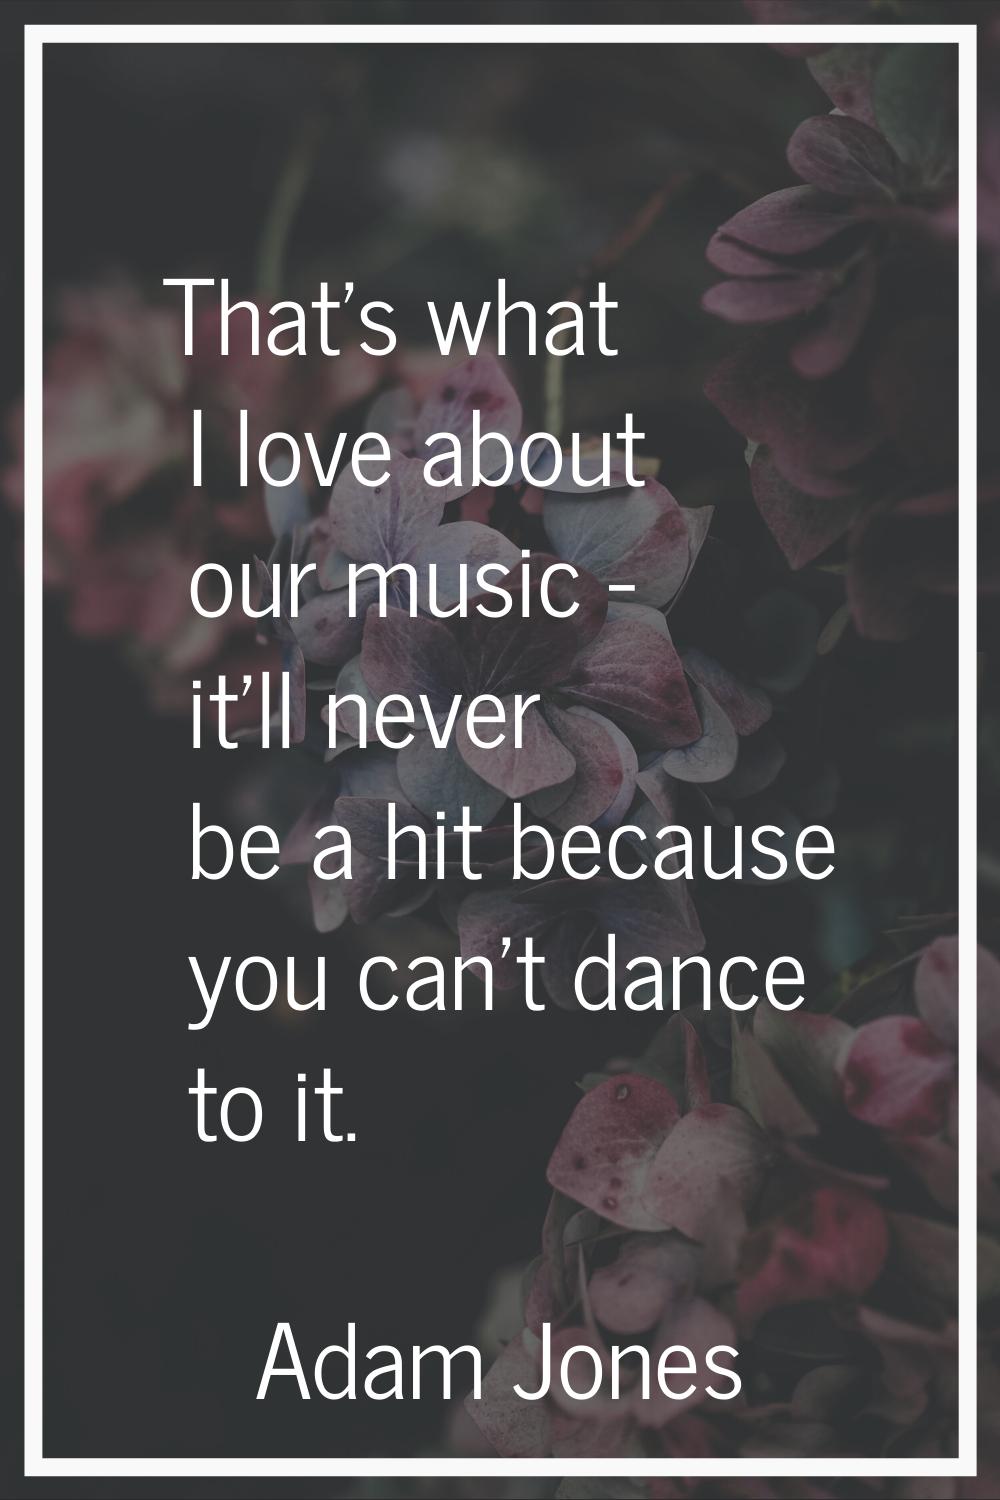 That's what I love about our music - it'll never be a hit because you can't dance to it.